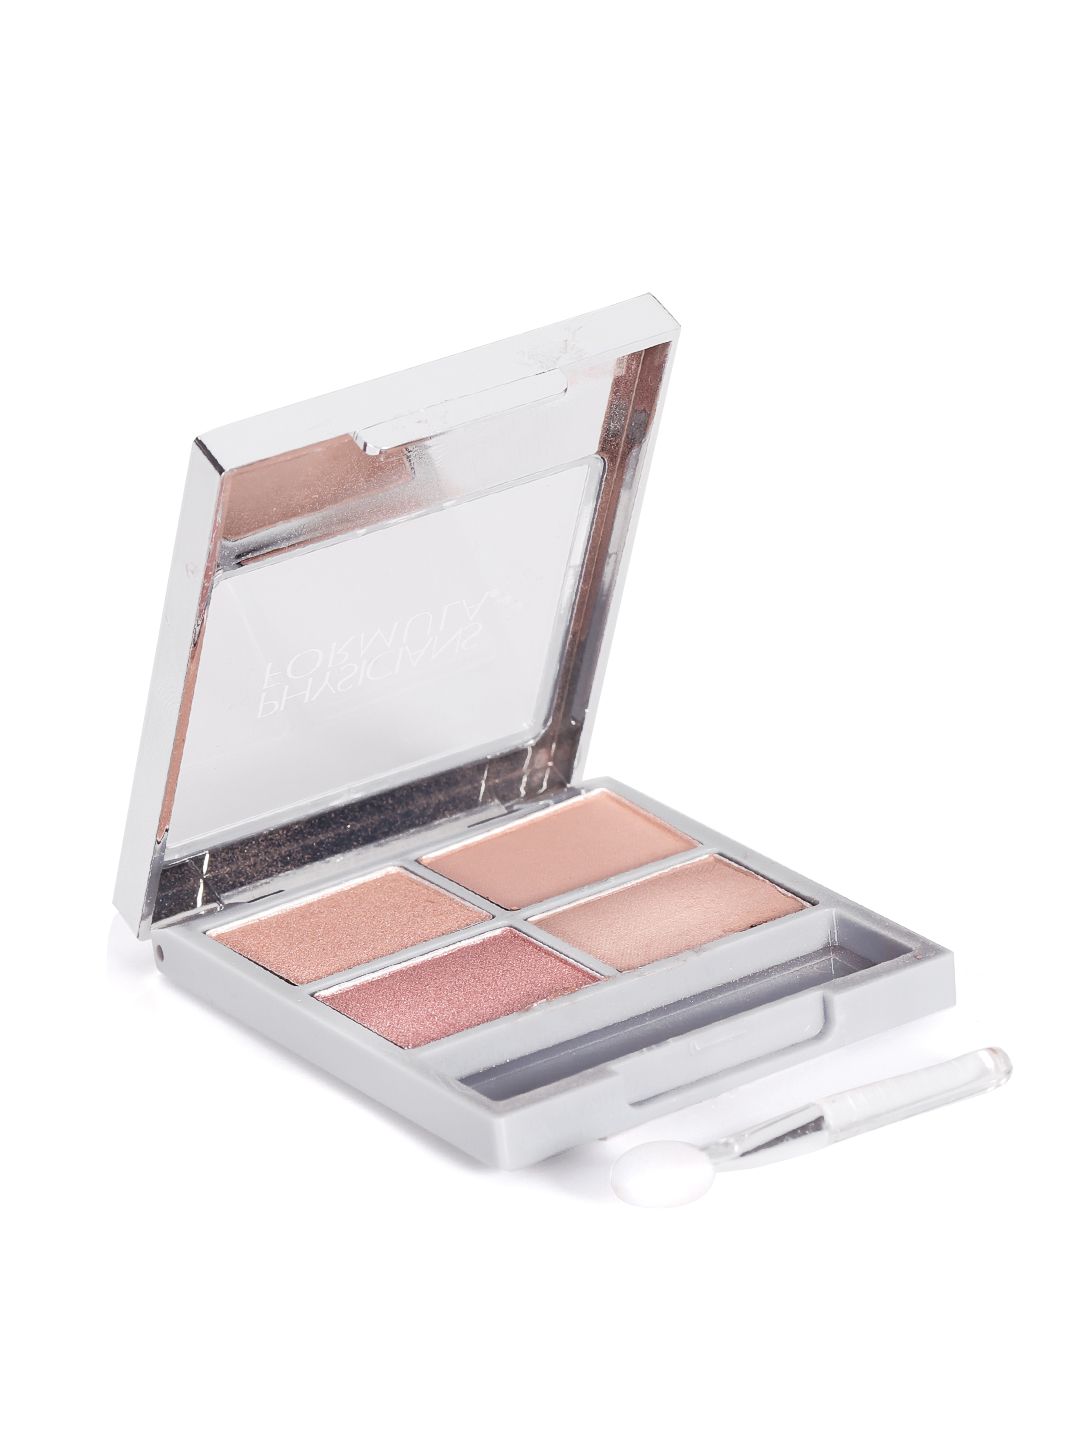 Physicians Formula Rose Nude The Healthy Eyeshadow Palette 6 g Price in India